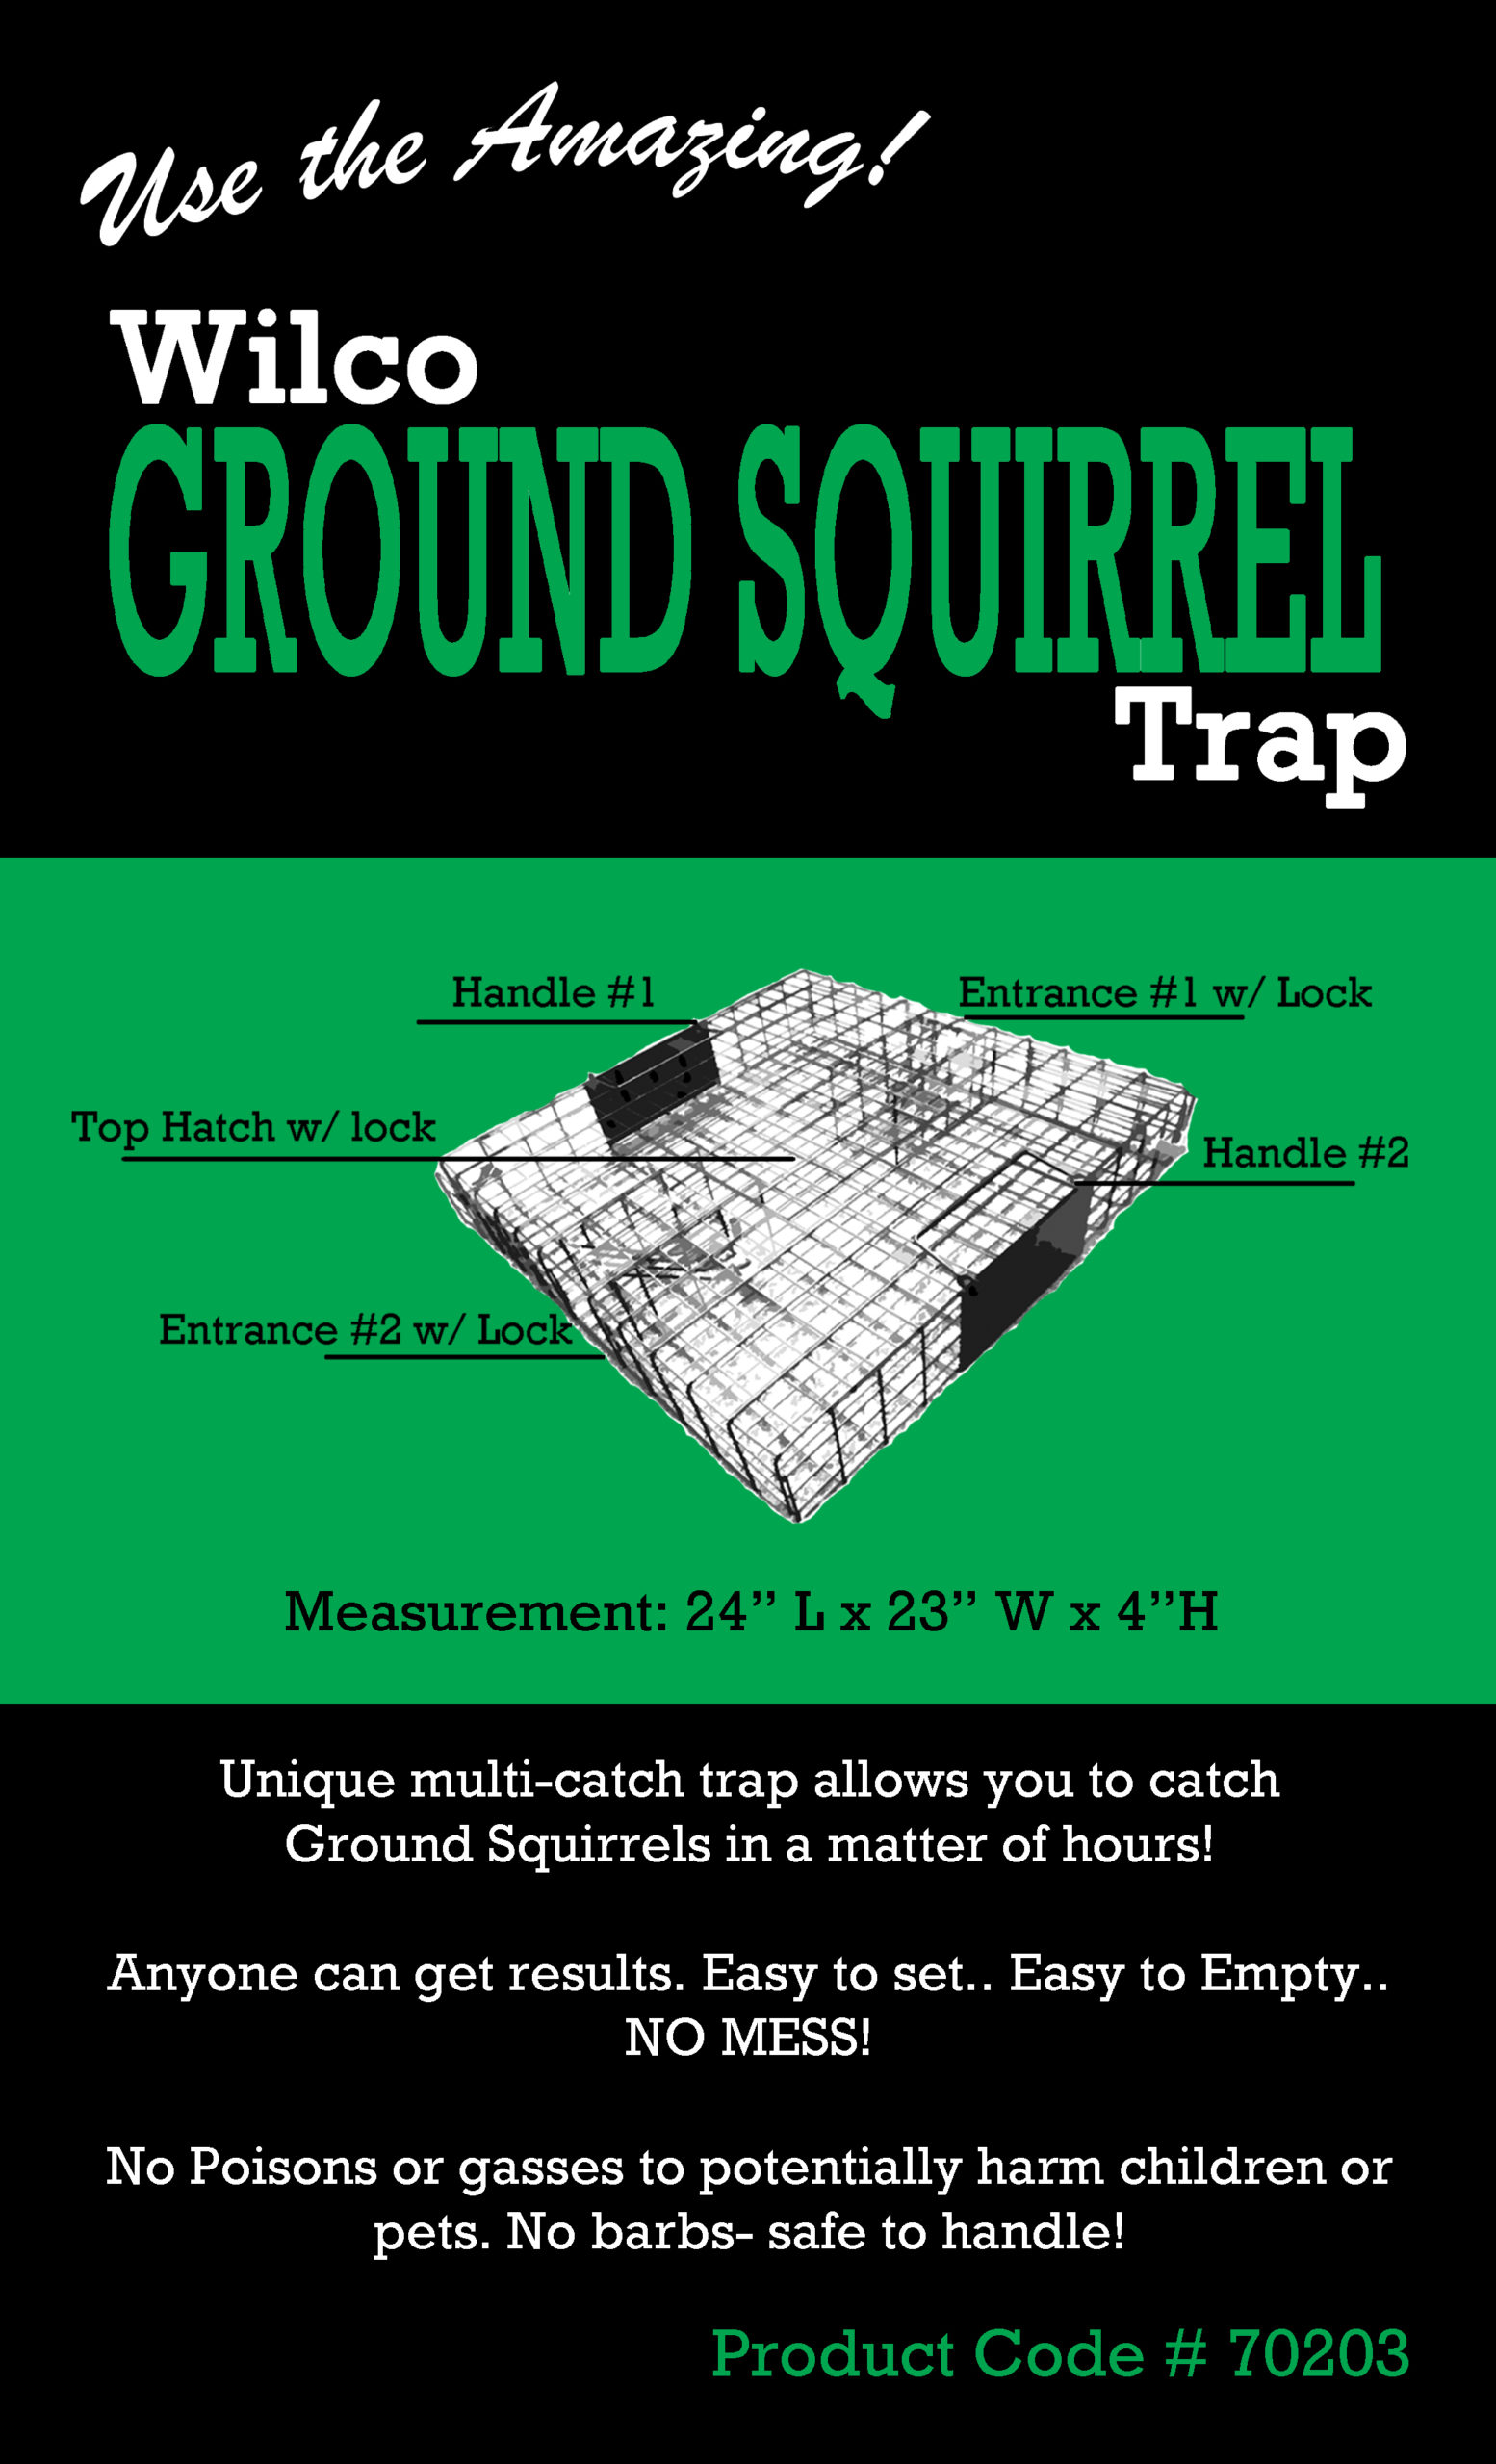 An easy solution for ground squirrels..